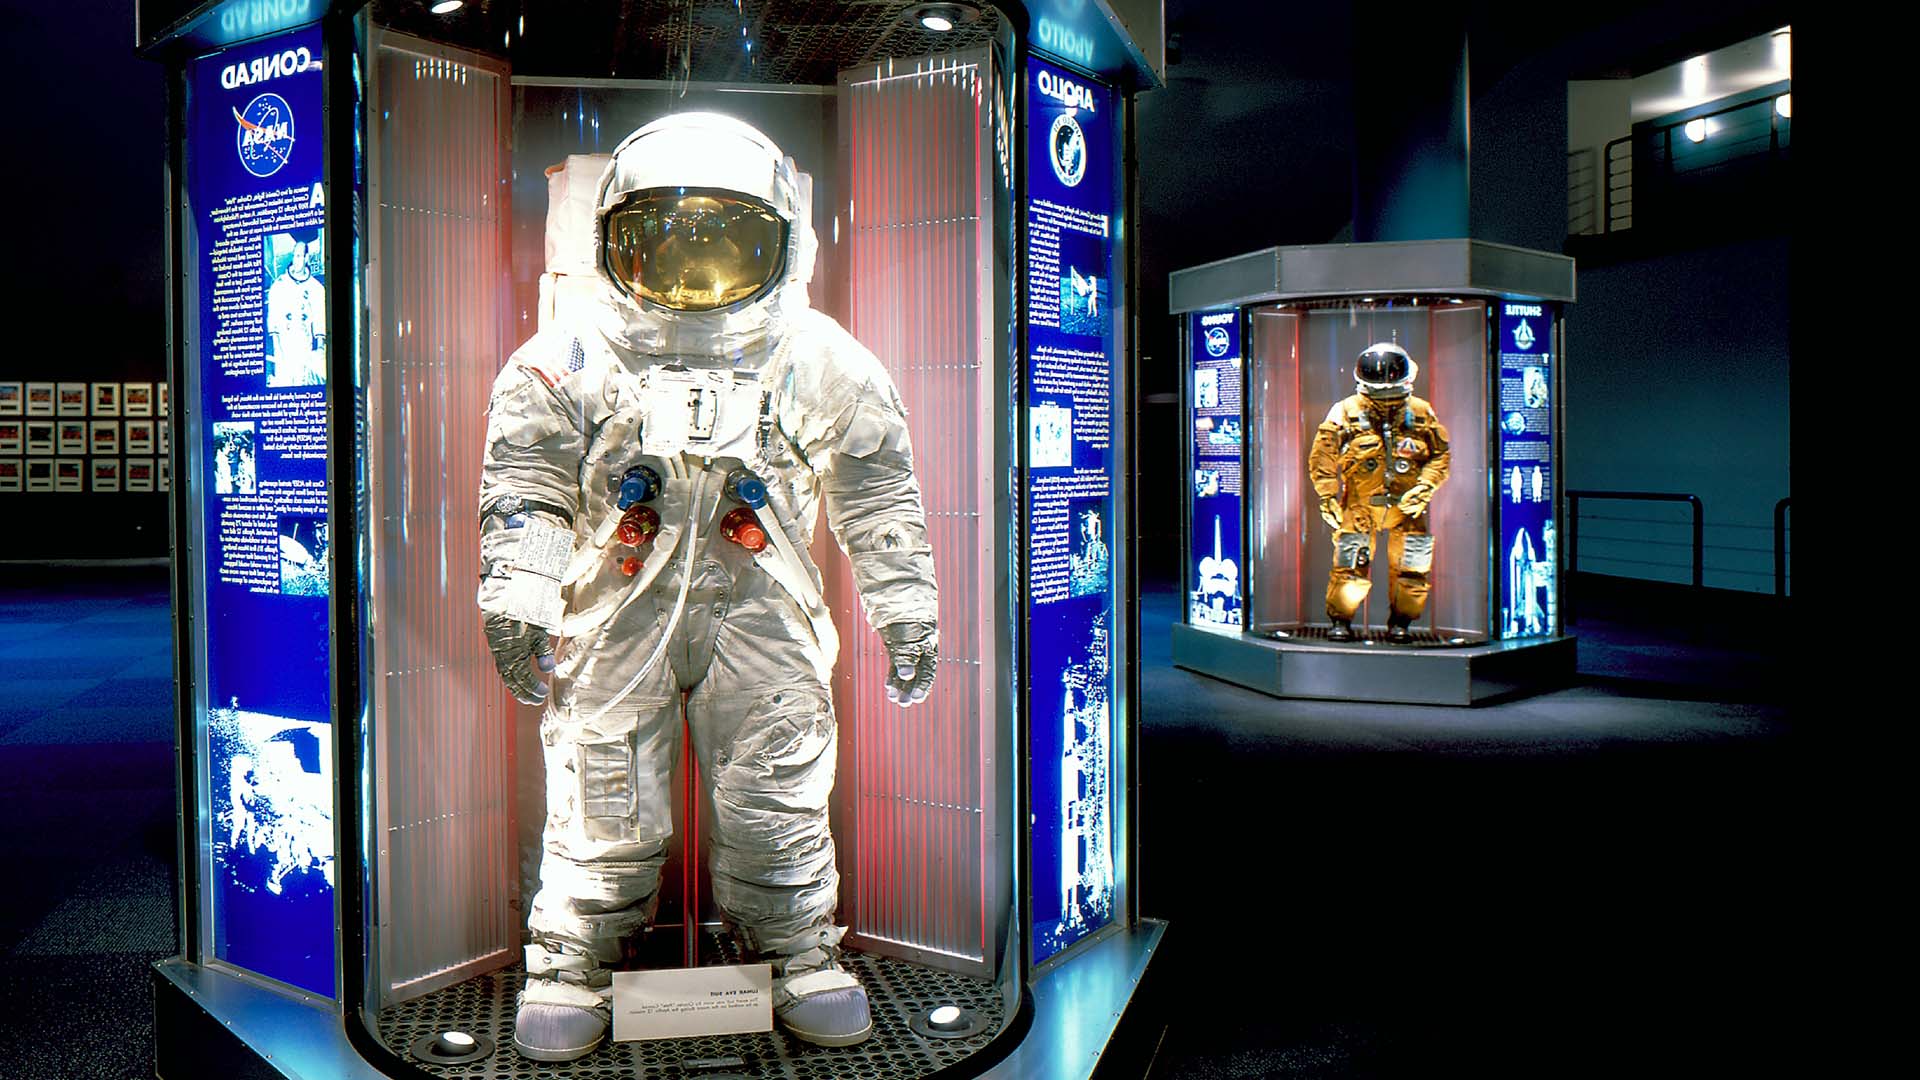 Channel Your Inner Astronaut at the Houston Space Center